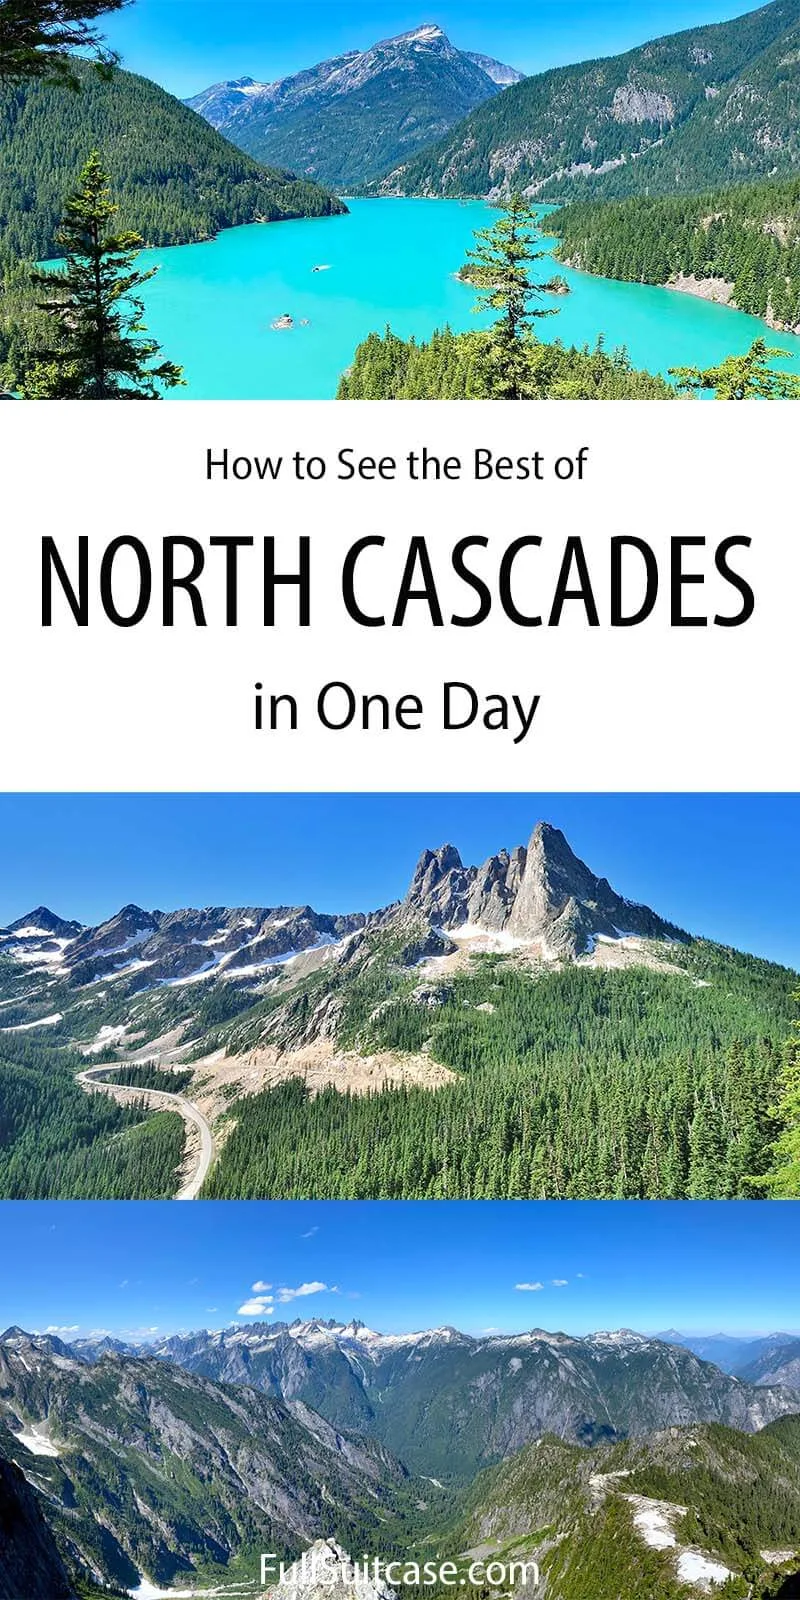 How to visit North Cascades National Park in one day